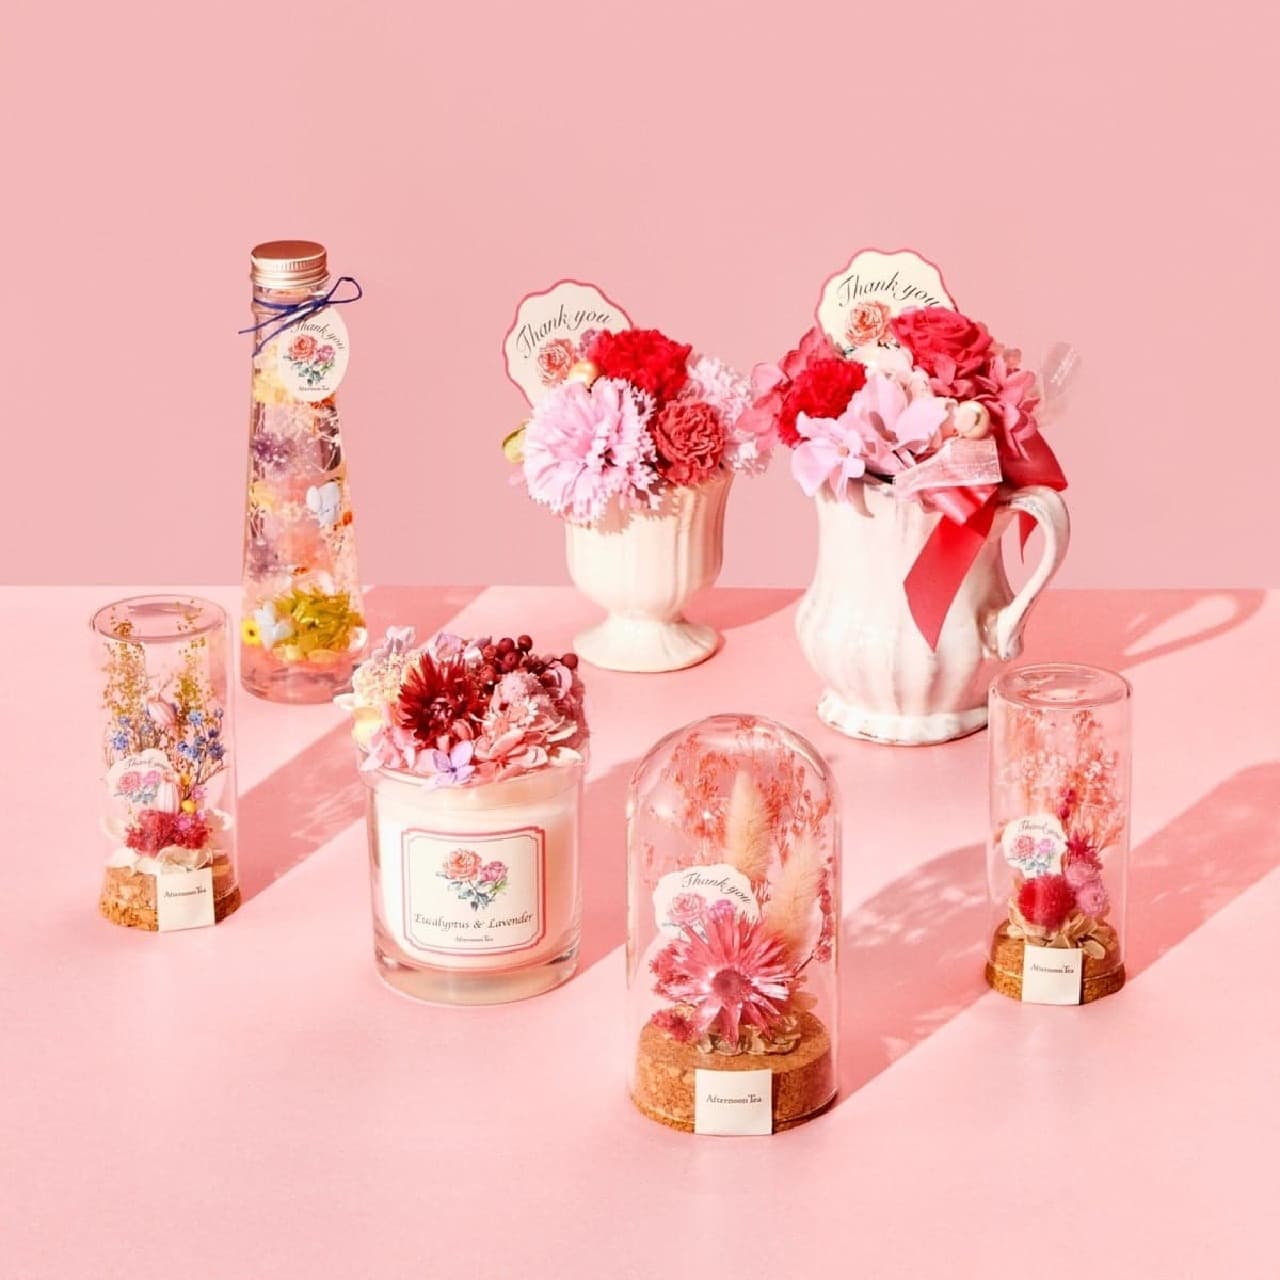 Afternoon Tea Living launches "Mom & Me." Mother's Day gift special from April 10, featuring limited wrapping and items exclusive to the online store Image 1